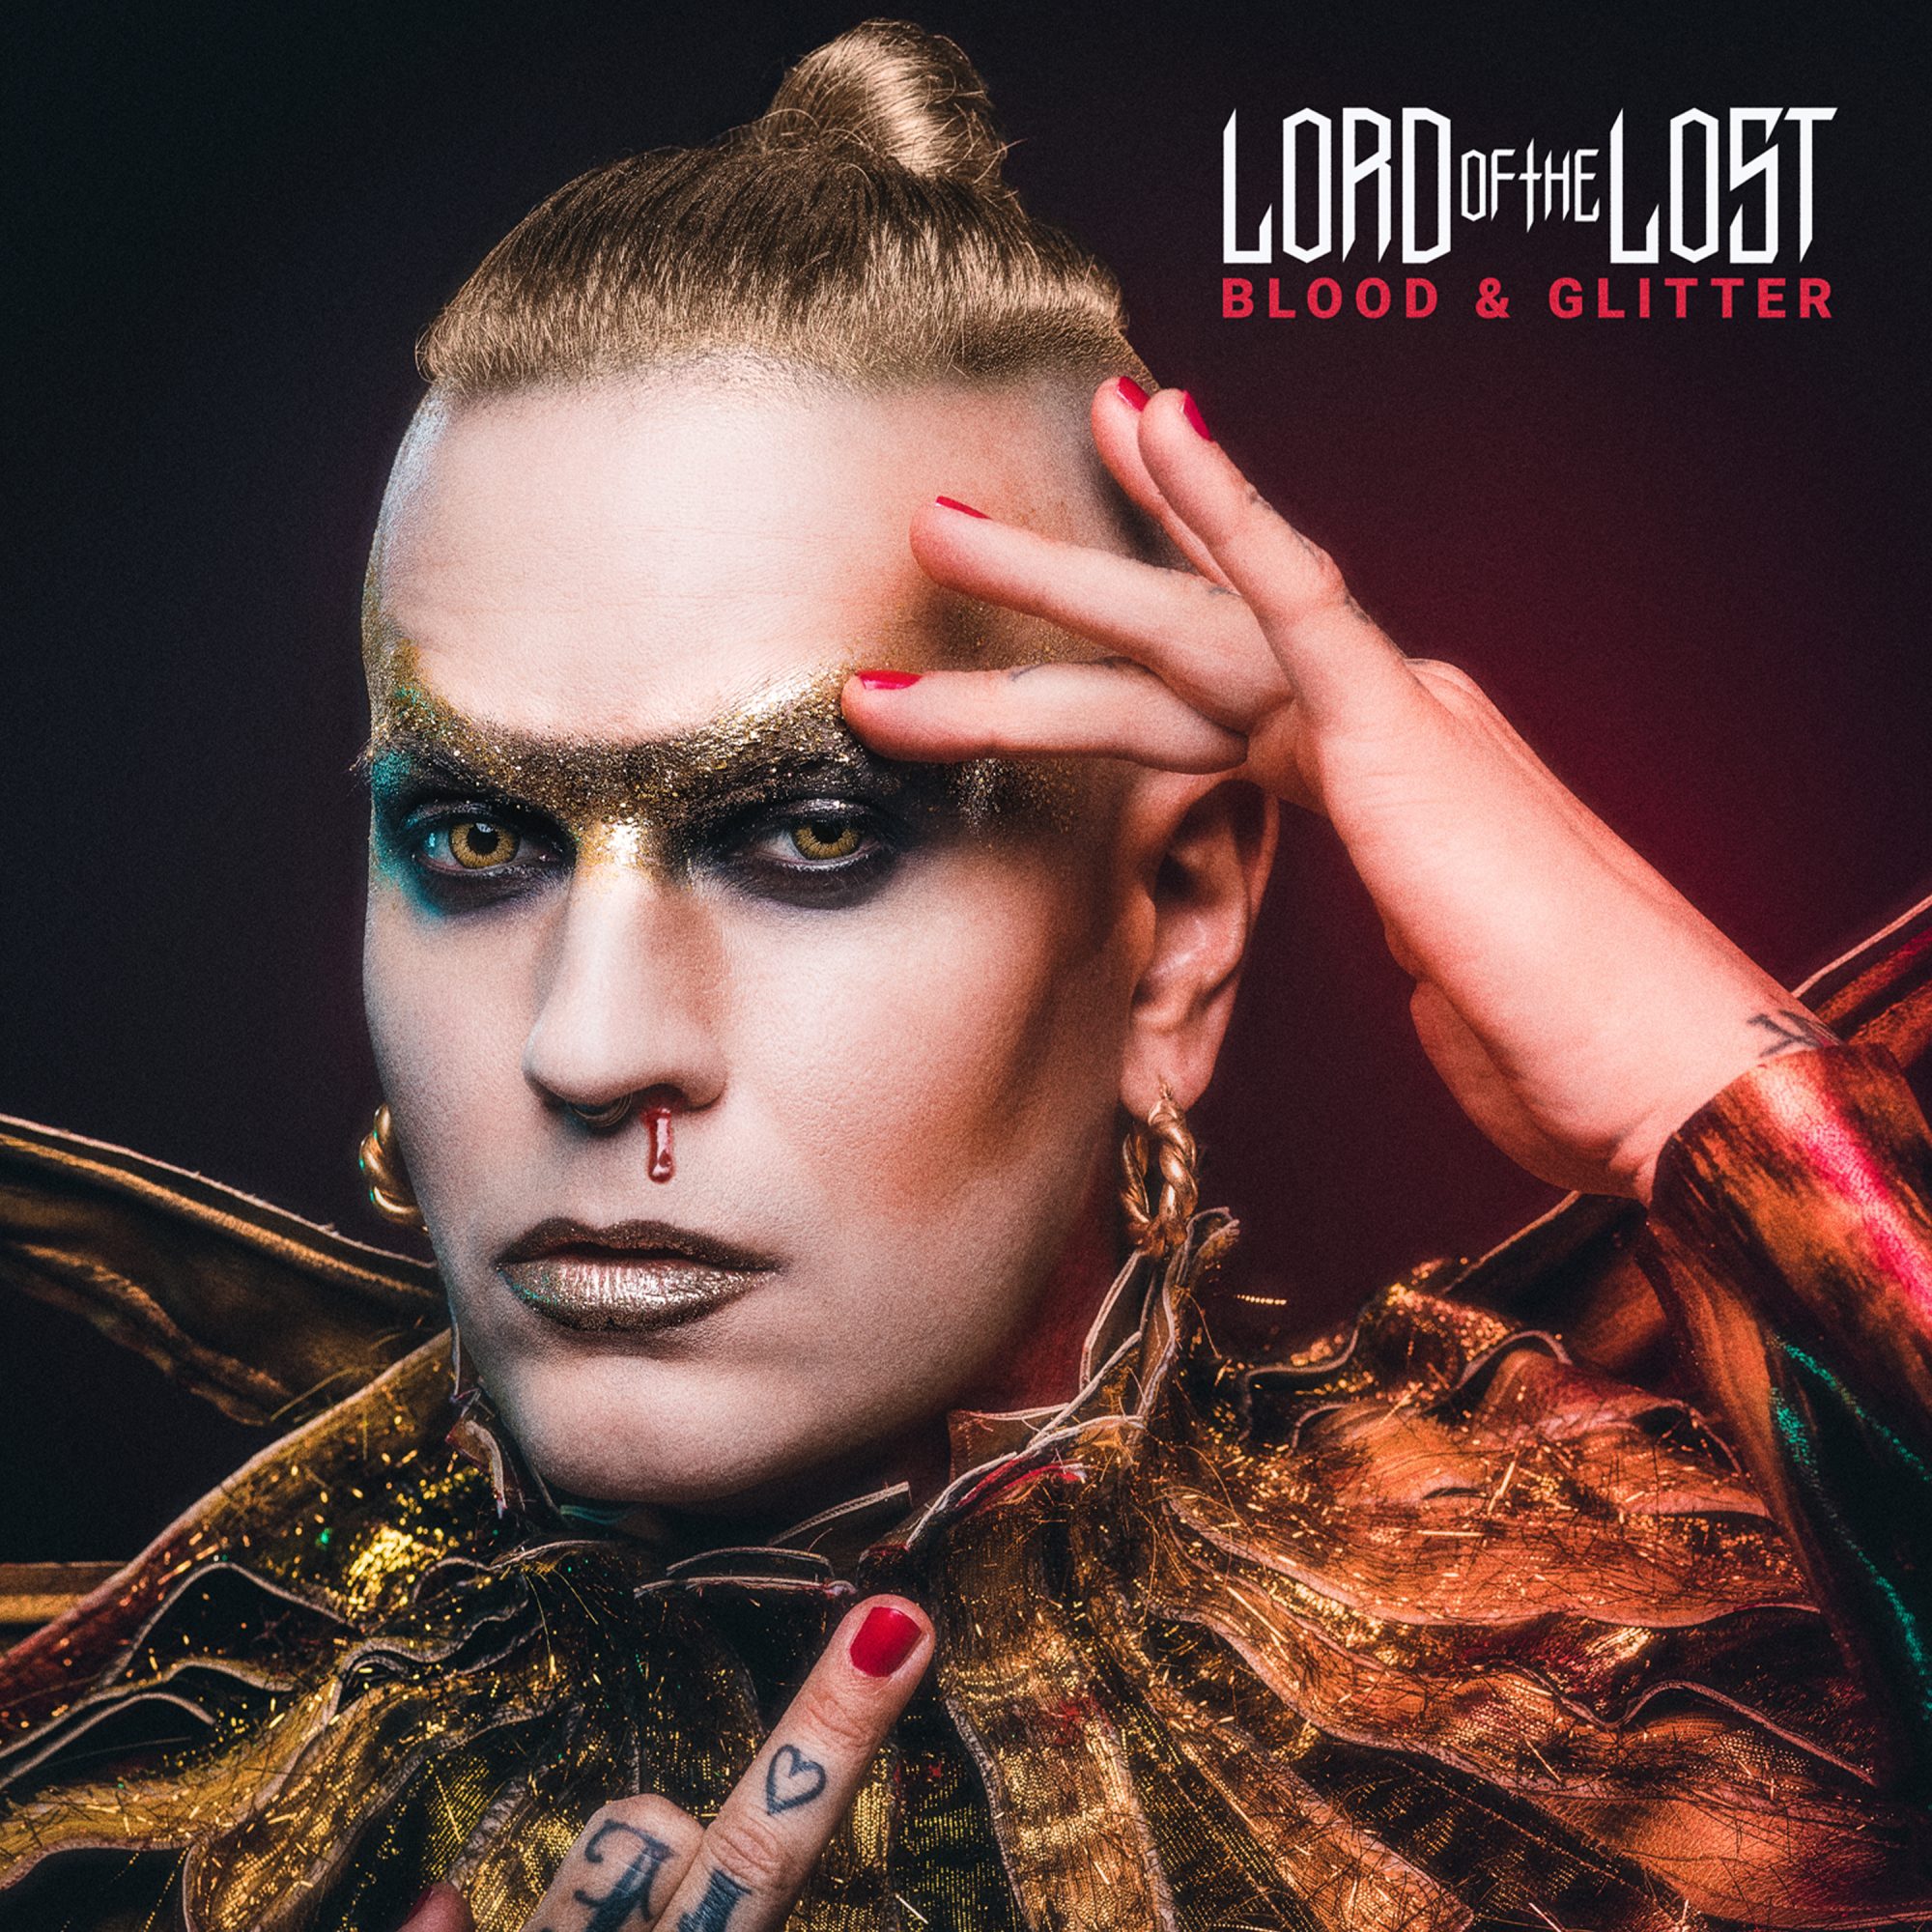 ALBUM REVIEW: Blood & Glitter Deluxe Edition by Lord of the Lost